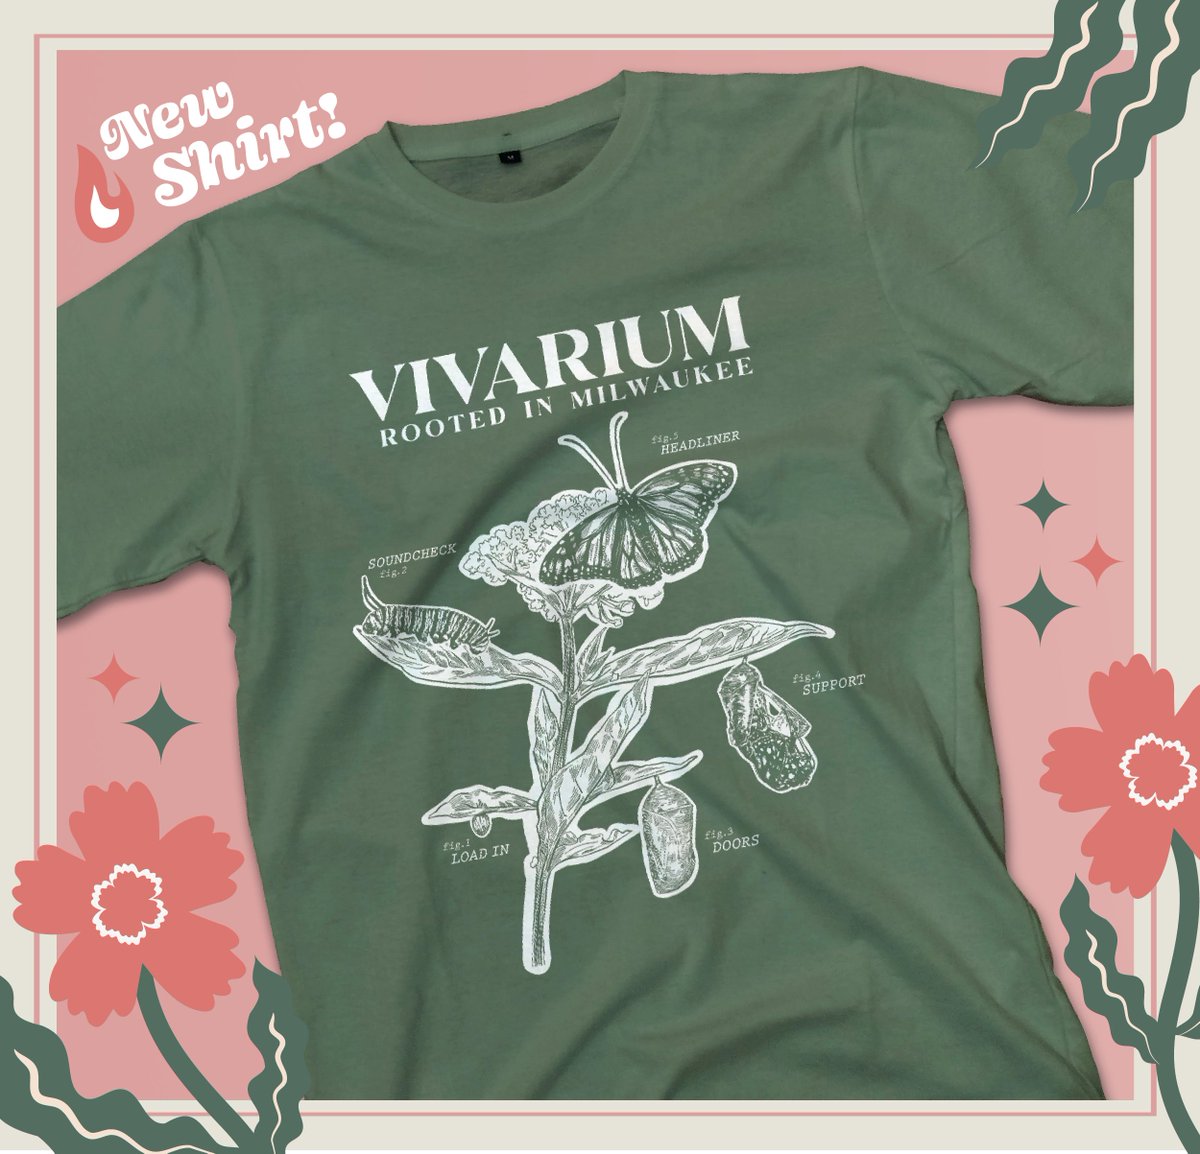 We're rockin' to nature's rhythm with our new shirts! butterfly lifecycle 🤝 show lifecycle at the Vivarium! Wanna show your support for our newest venue? Grab one for just $25 now! ➤ bit.ly/BUTTERFLYMKE24